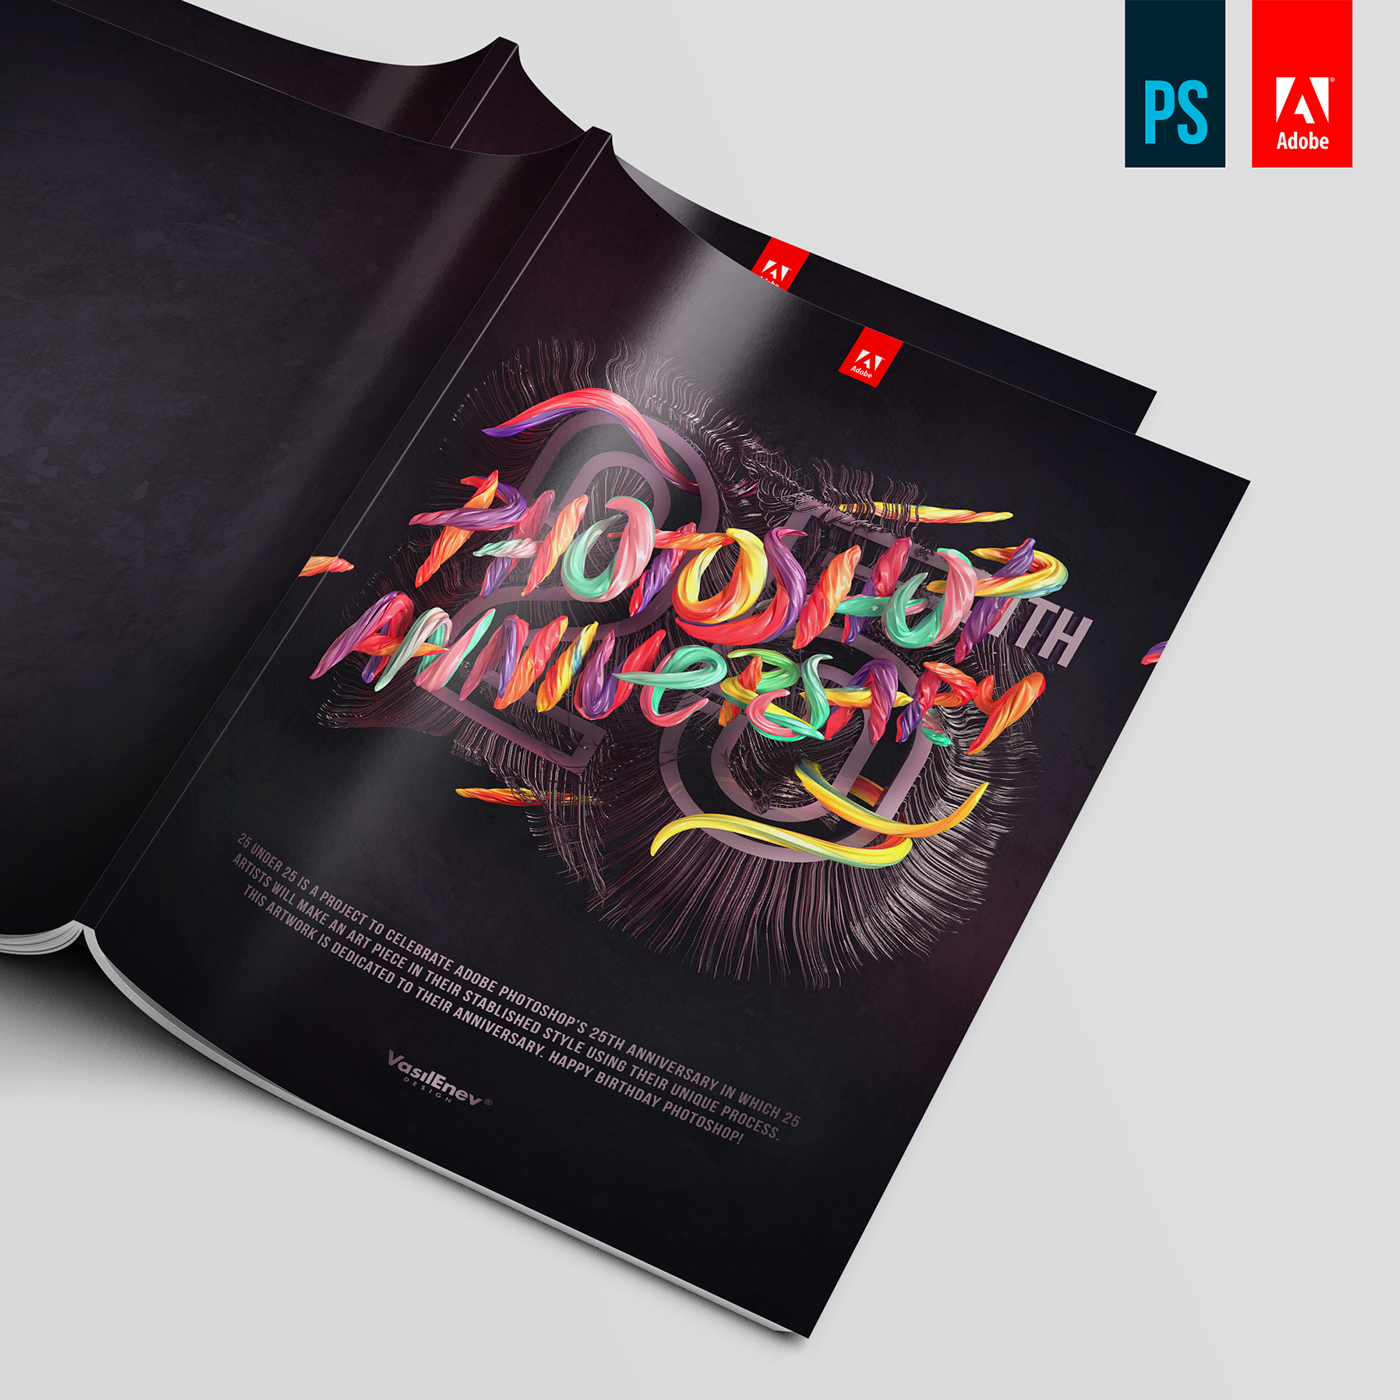 visual colorful c4d inspiration poster art abstract type Ps25Under25 25under25 colors photoshop Birthday anniversary inspire